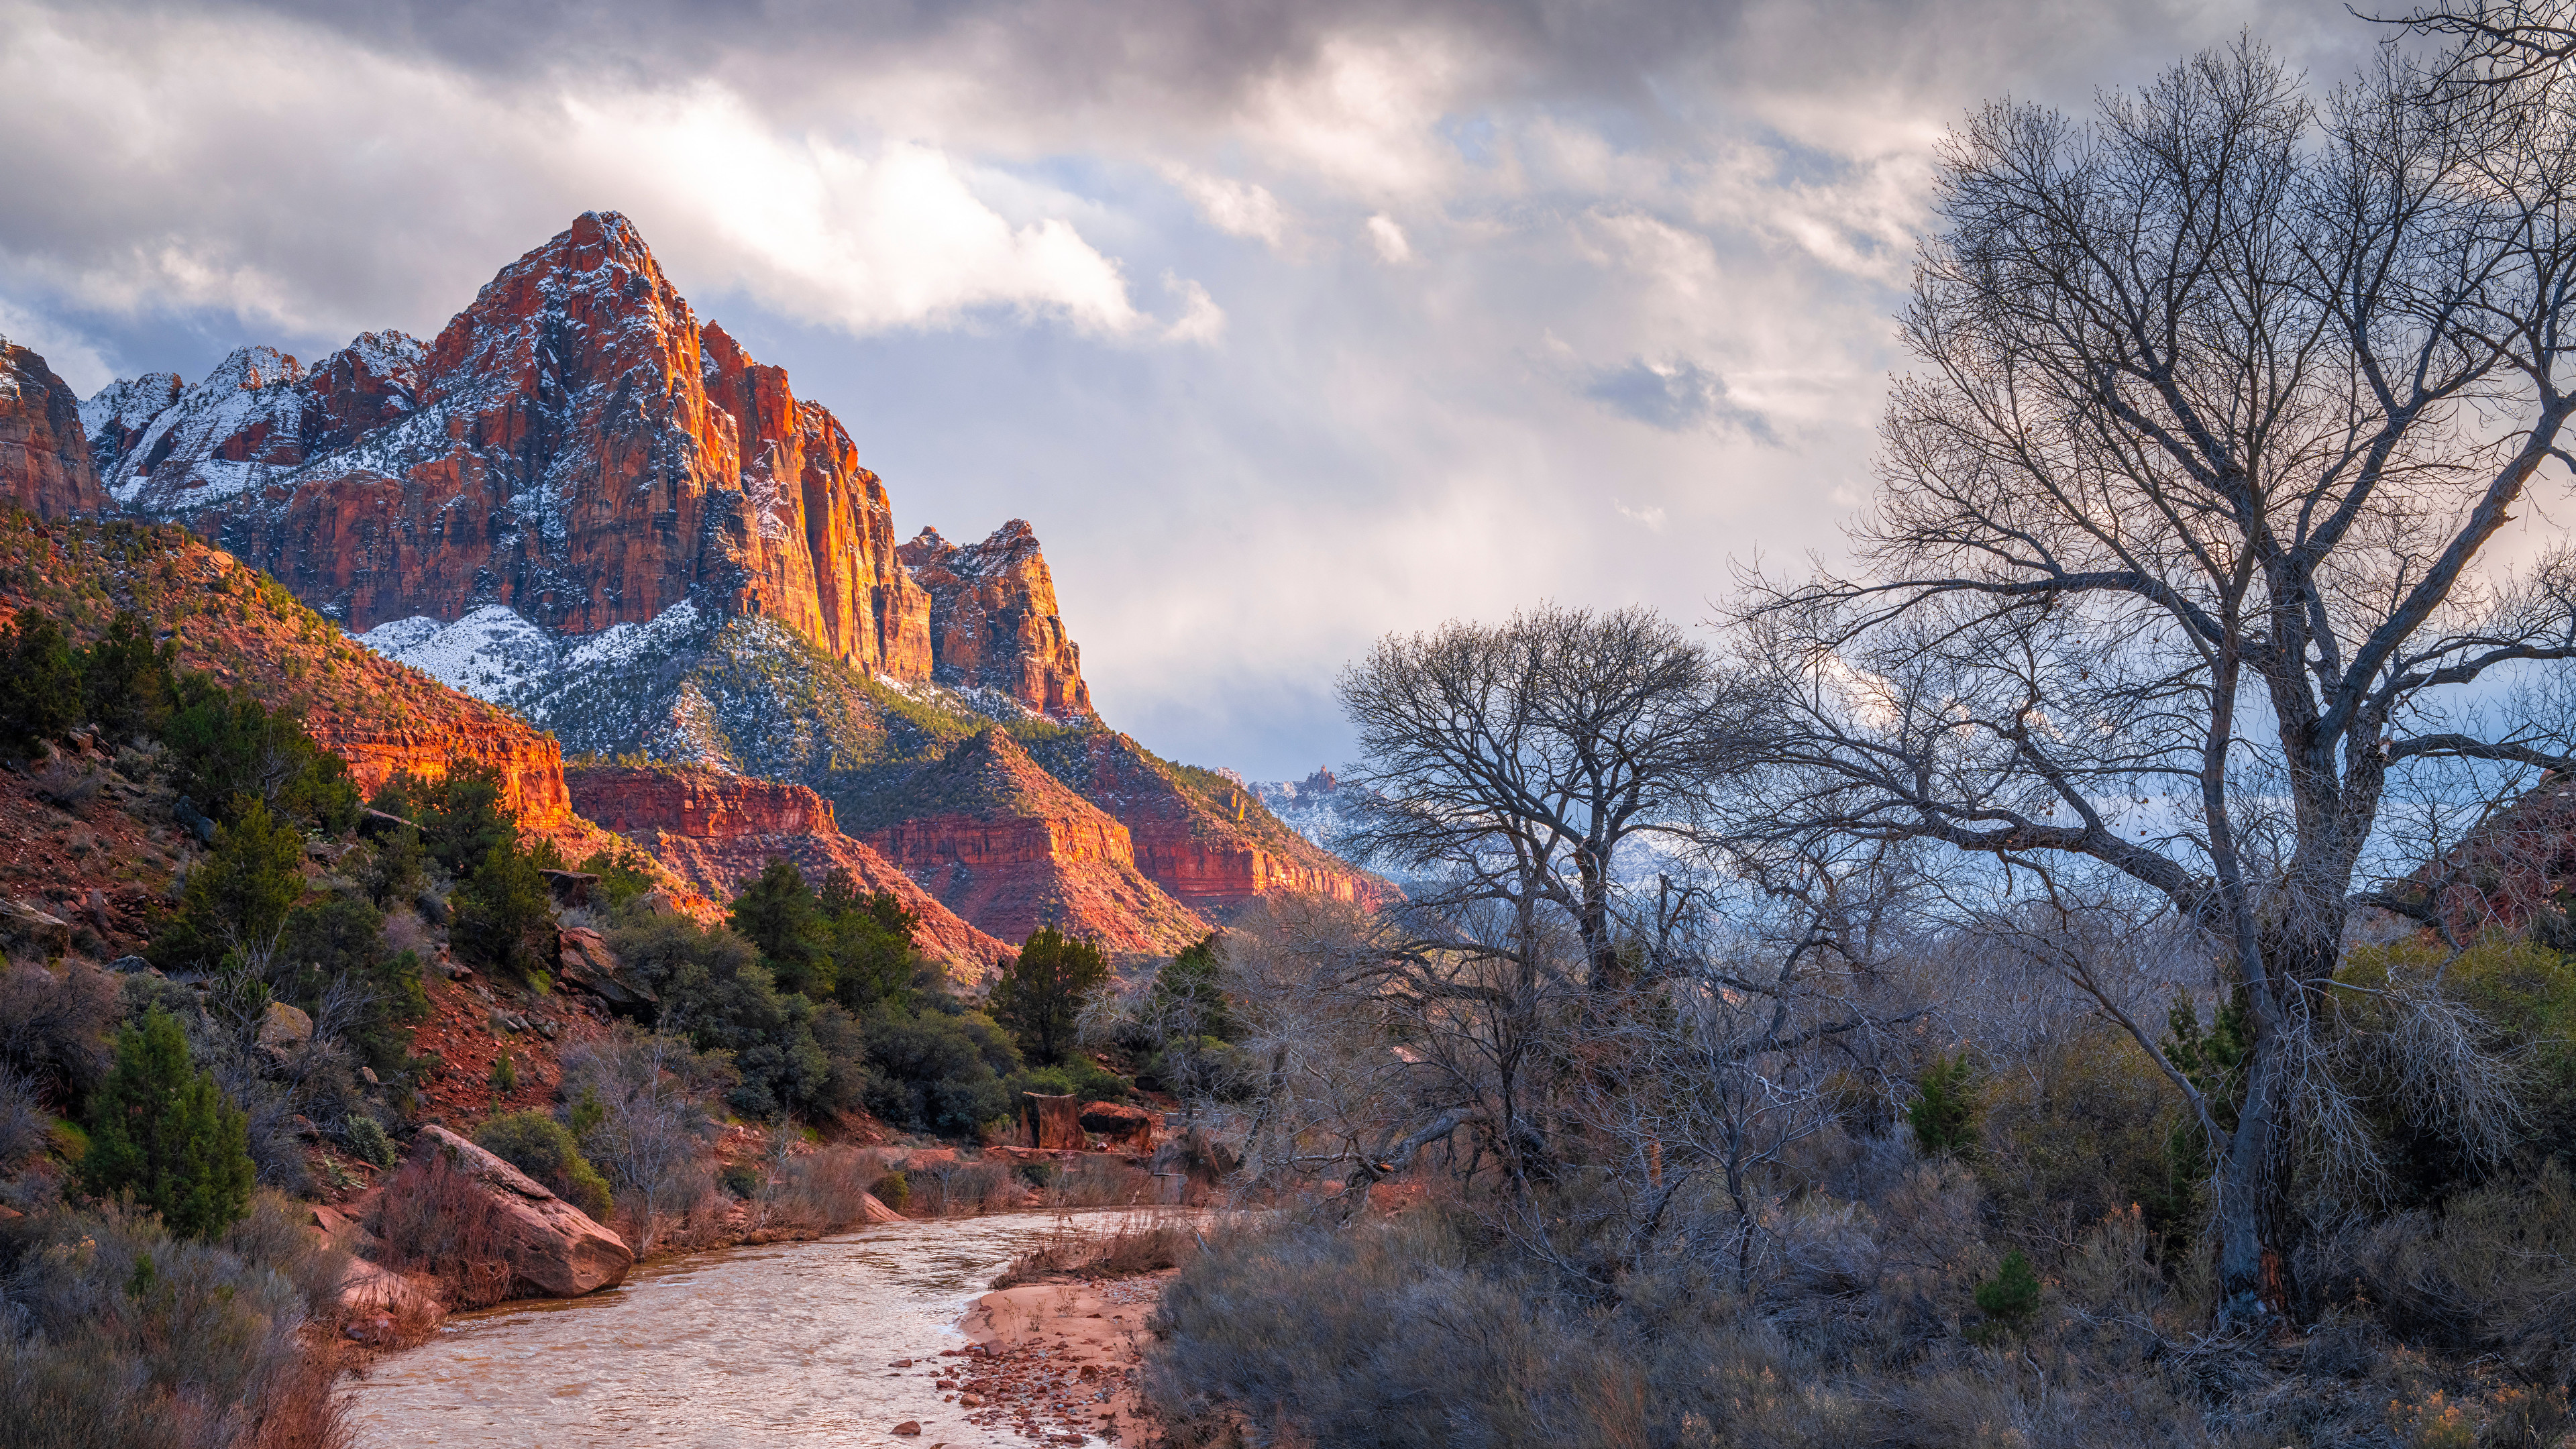 General 3840x2160 USA Utah nature Zion National Park river mountains trees sky clouds snow landscape water snowy mountain